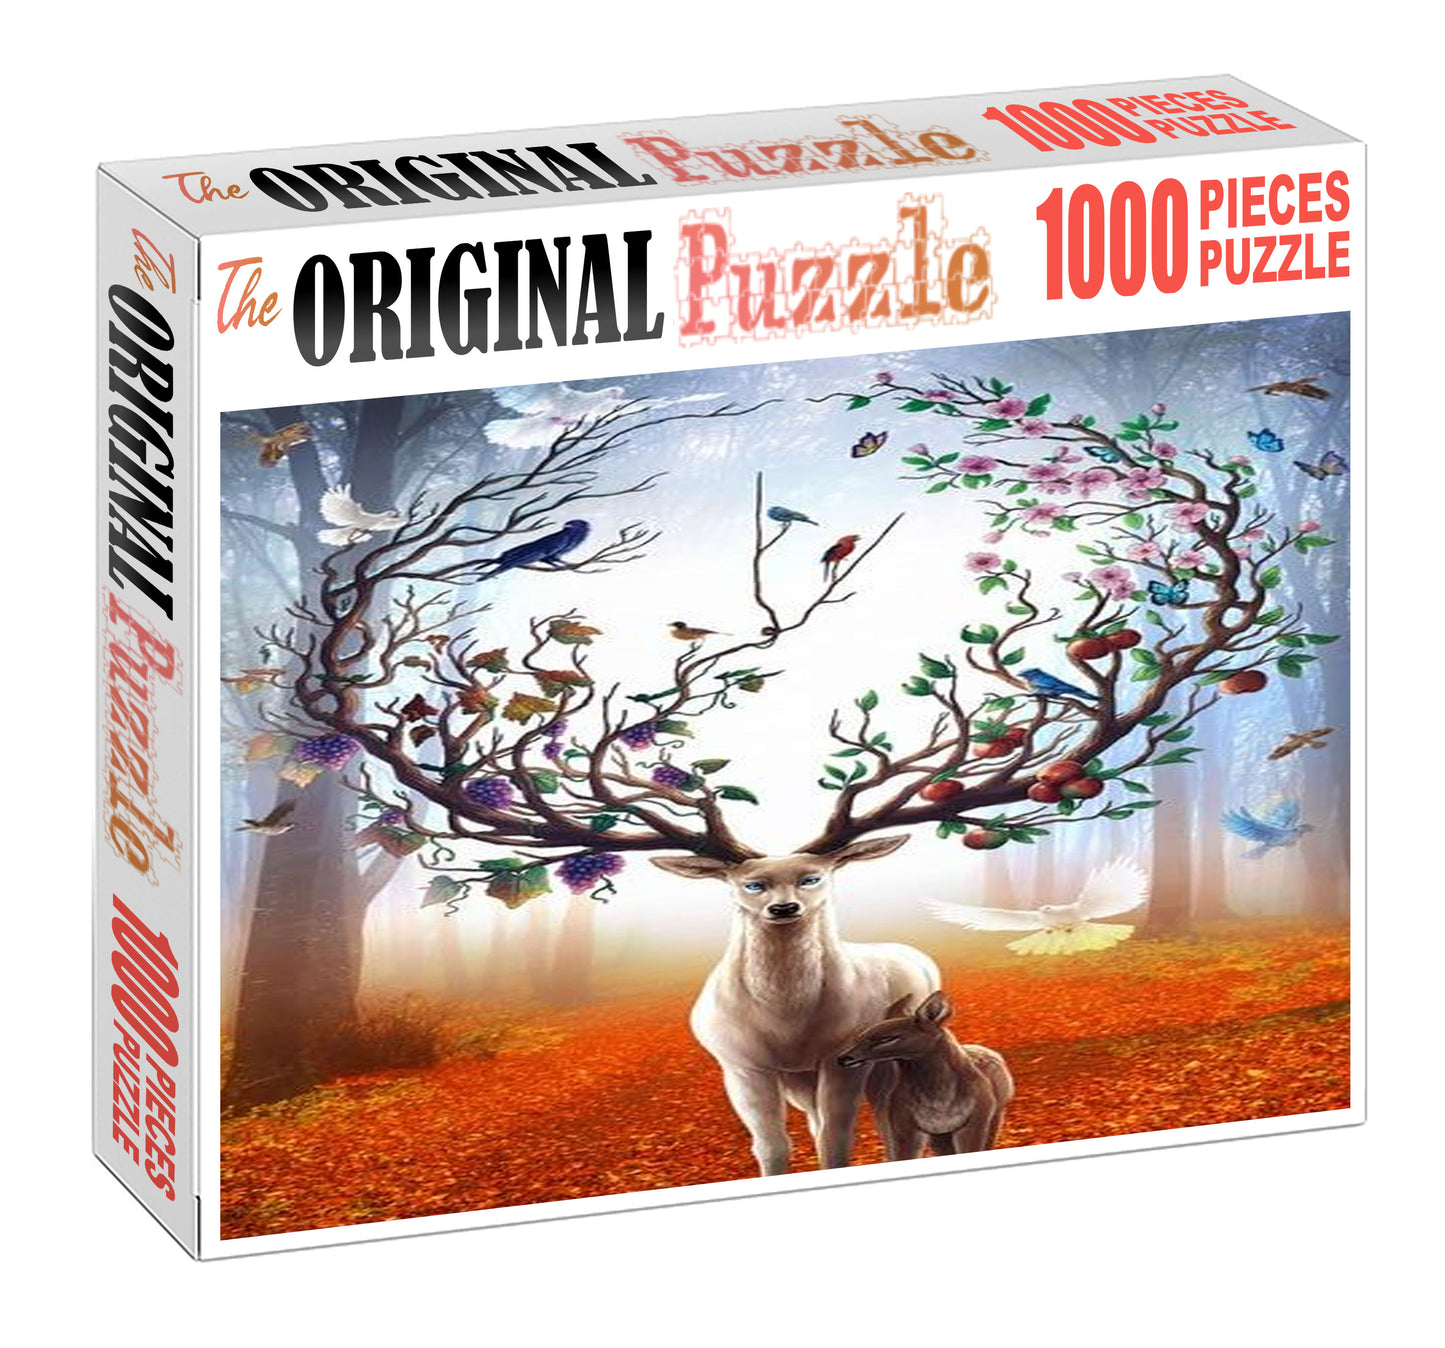 Nature Guardian is Wooden 1000 Piece Jigsaw Puzzle Toy For Adults and Kids